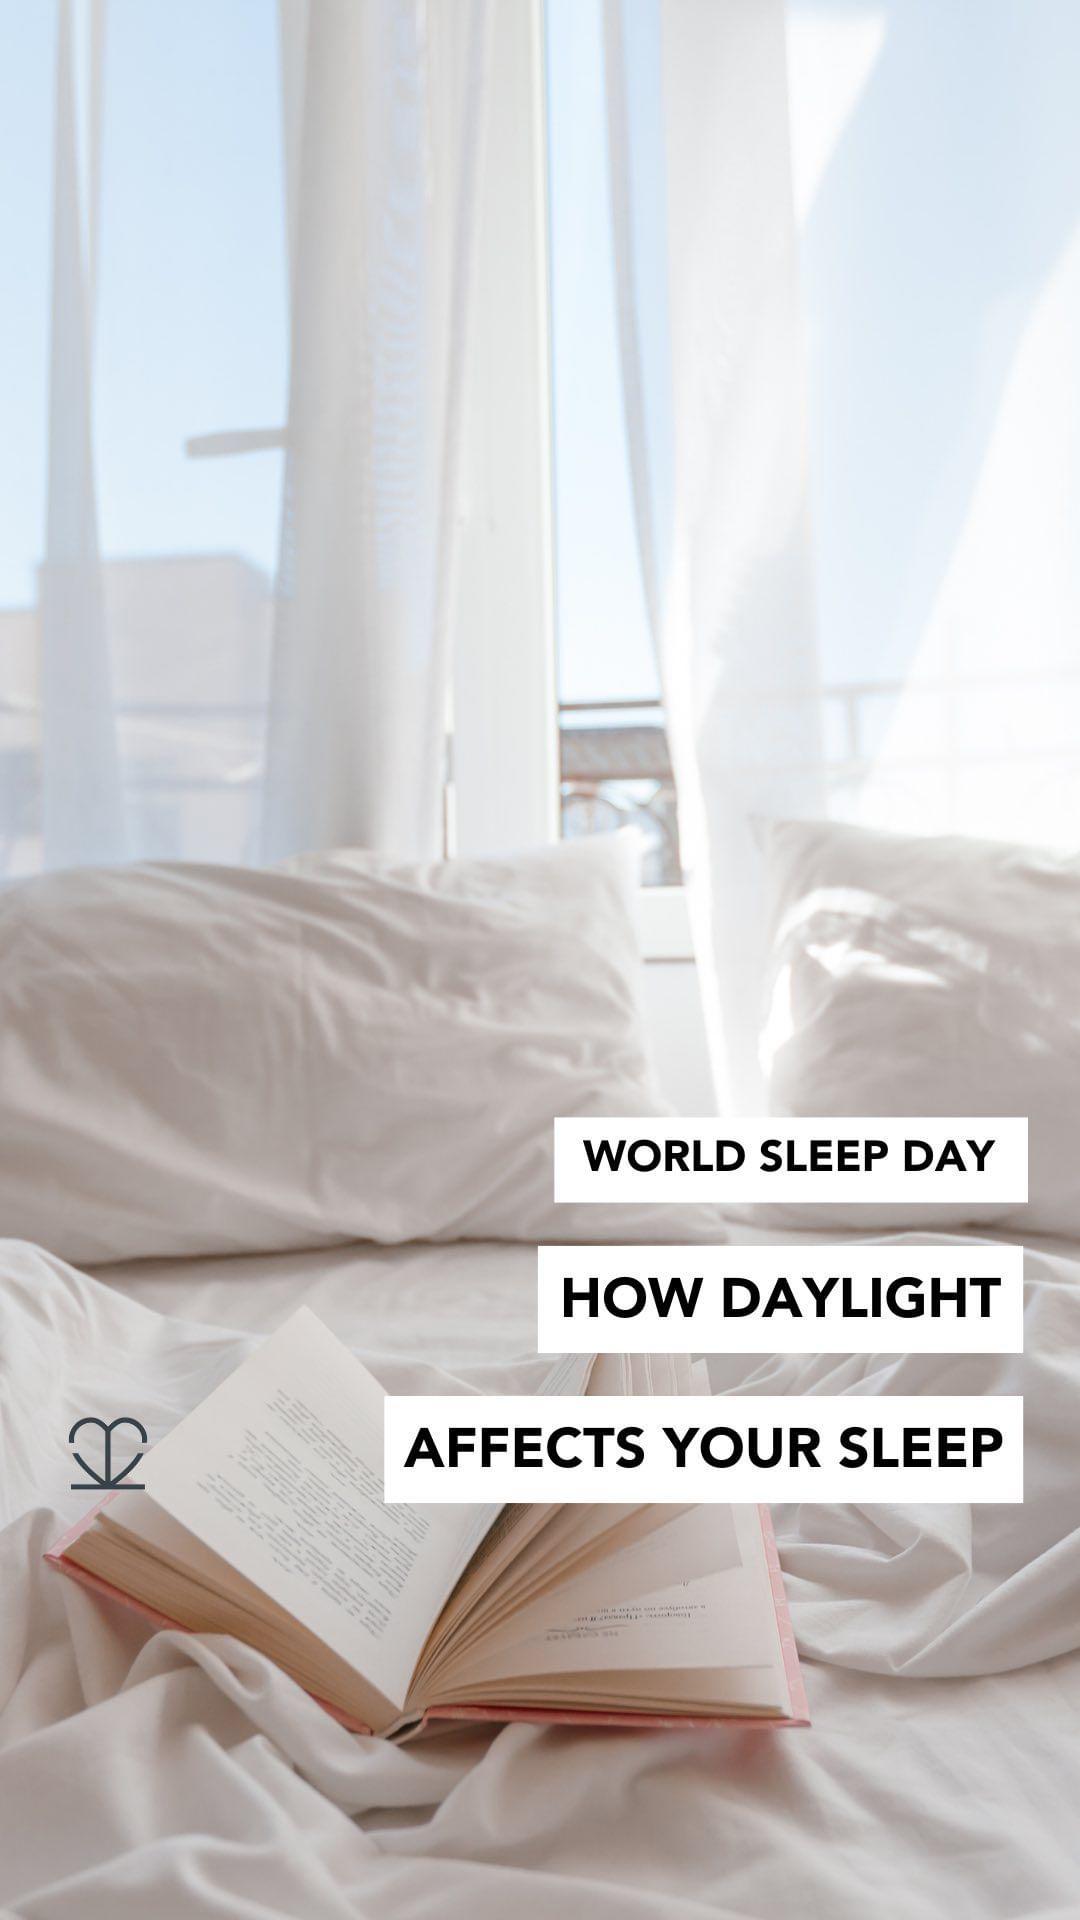 class="content__text"
 World Sleep Day. Get yourself outside first thing in the morning to regulate circadian rhythm, which is the internal process responsible for managing your your sleep/wake cycle. To learn more about this, and for more tips on how to improve your sleep, check out our blog on sleep in our Learn highlights.

 #LoveHemp #LoveLife #worldsleepday 
 